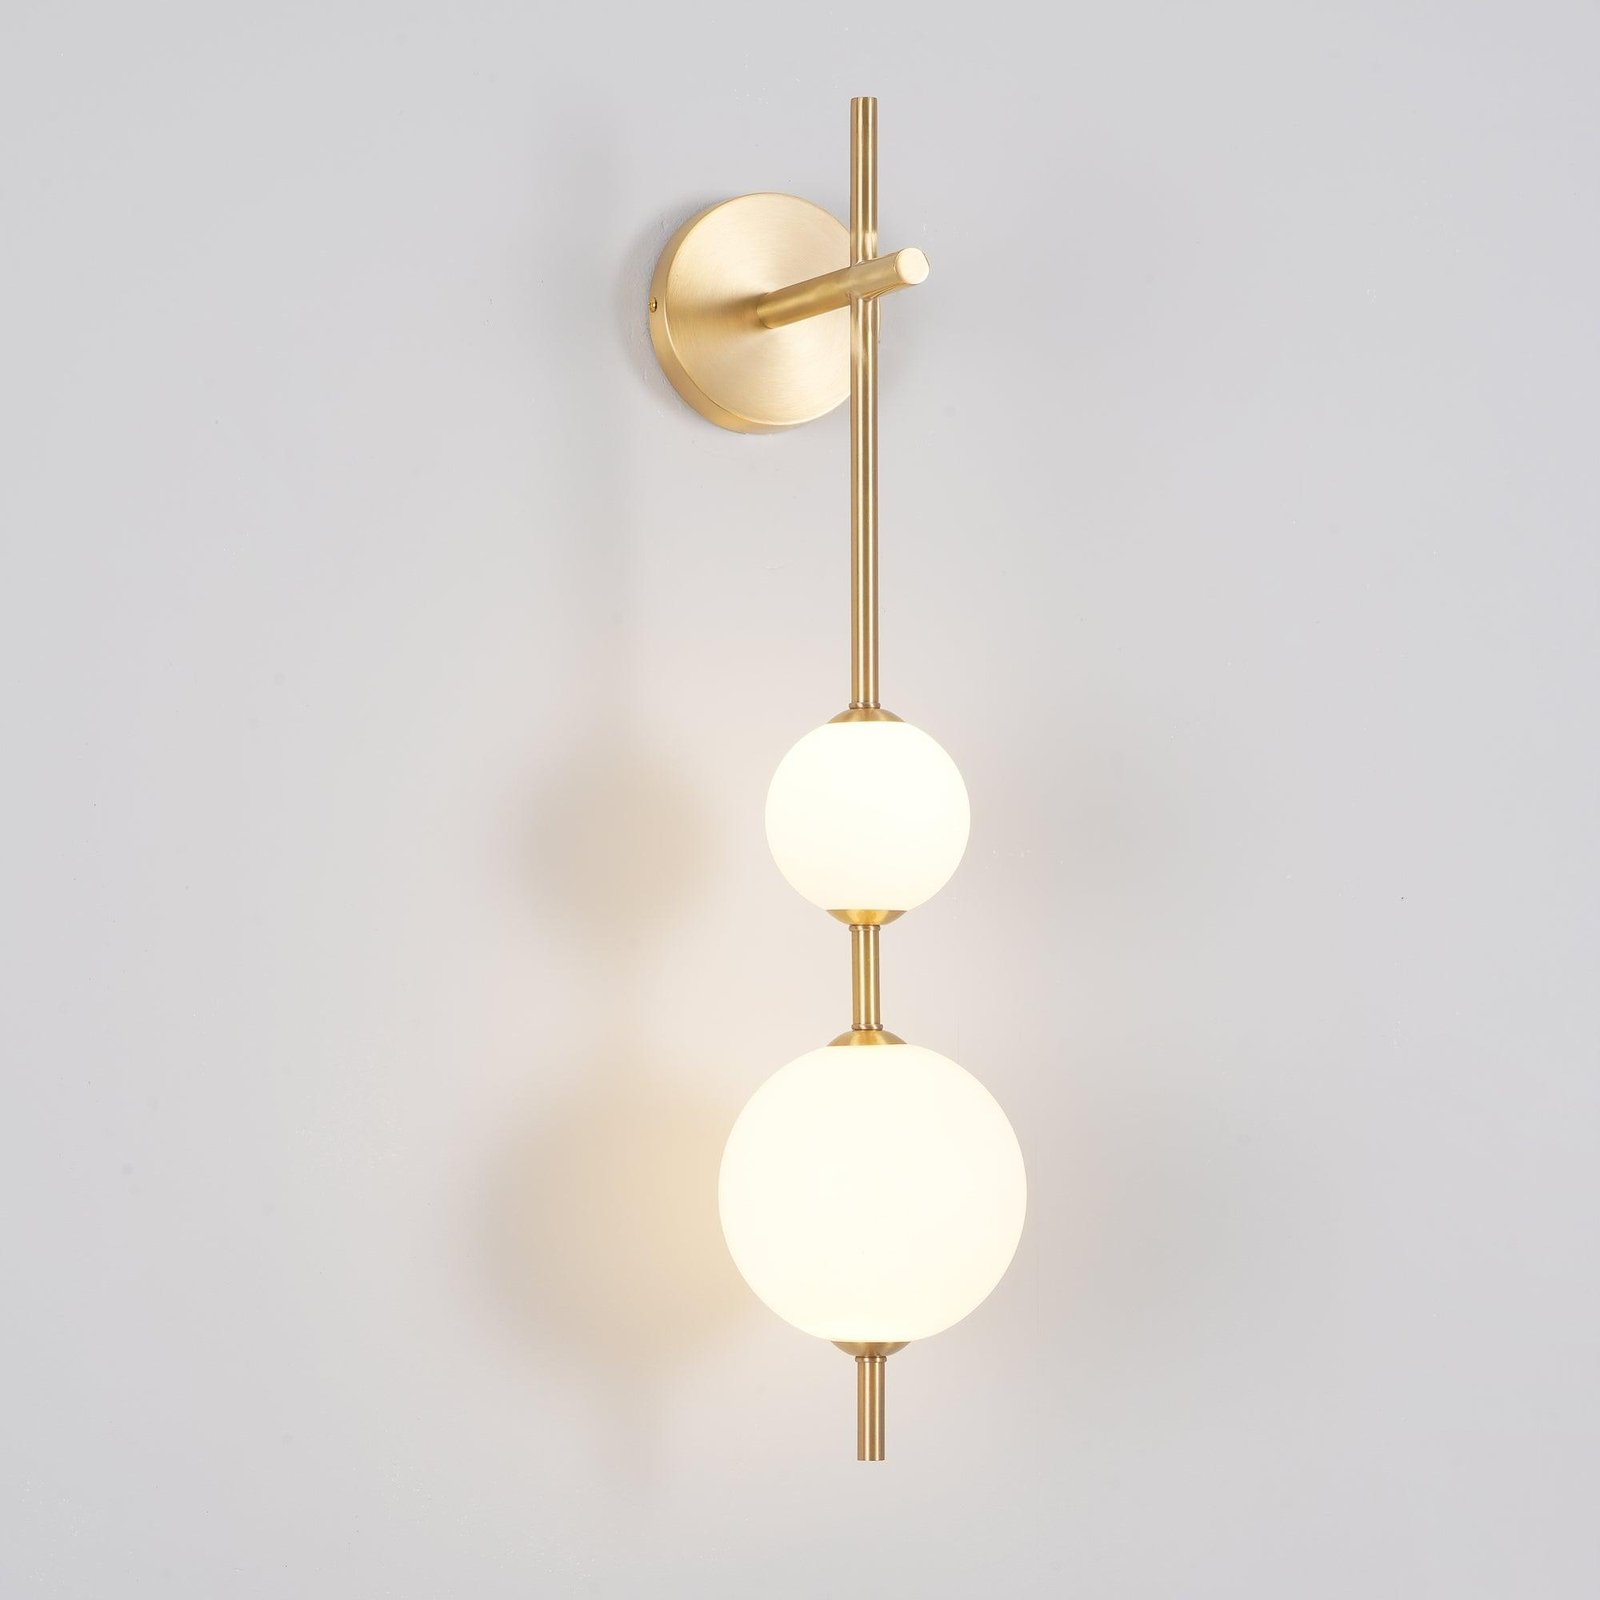 Set of 2 Brass Vertical Globe Wall Lamps, Diameter 15cm x Height 65cm, with Cool White Lighting